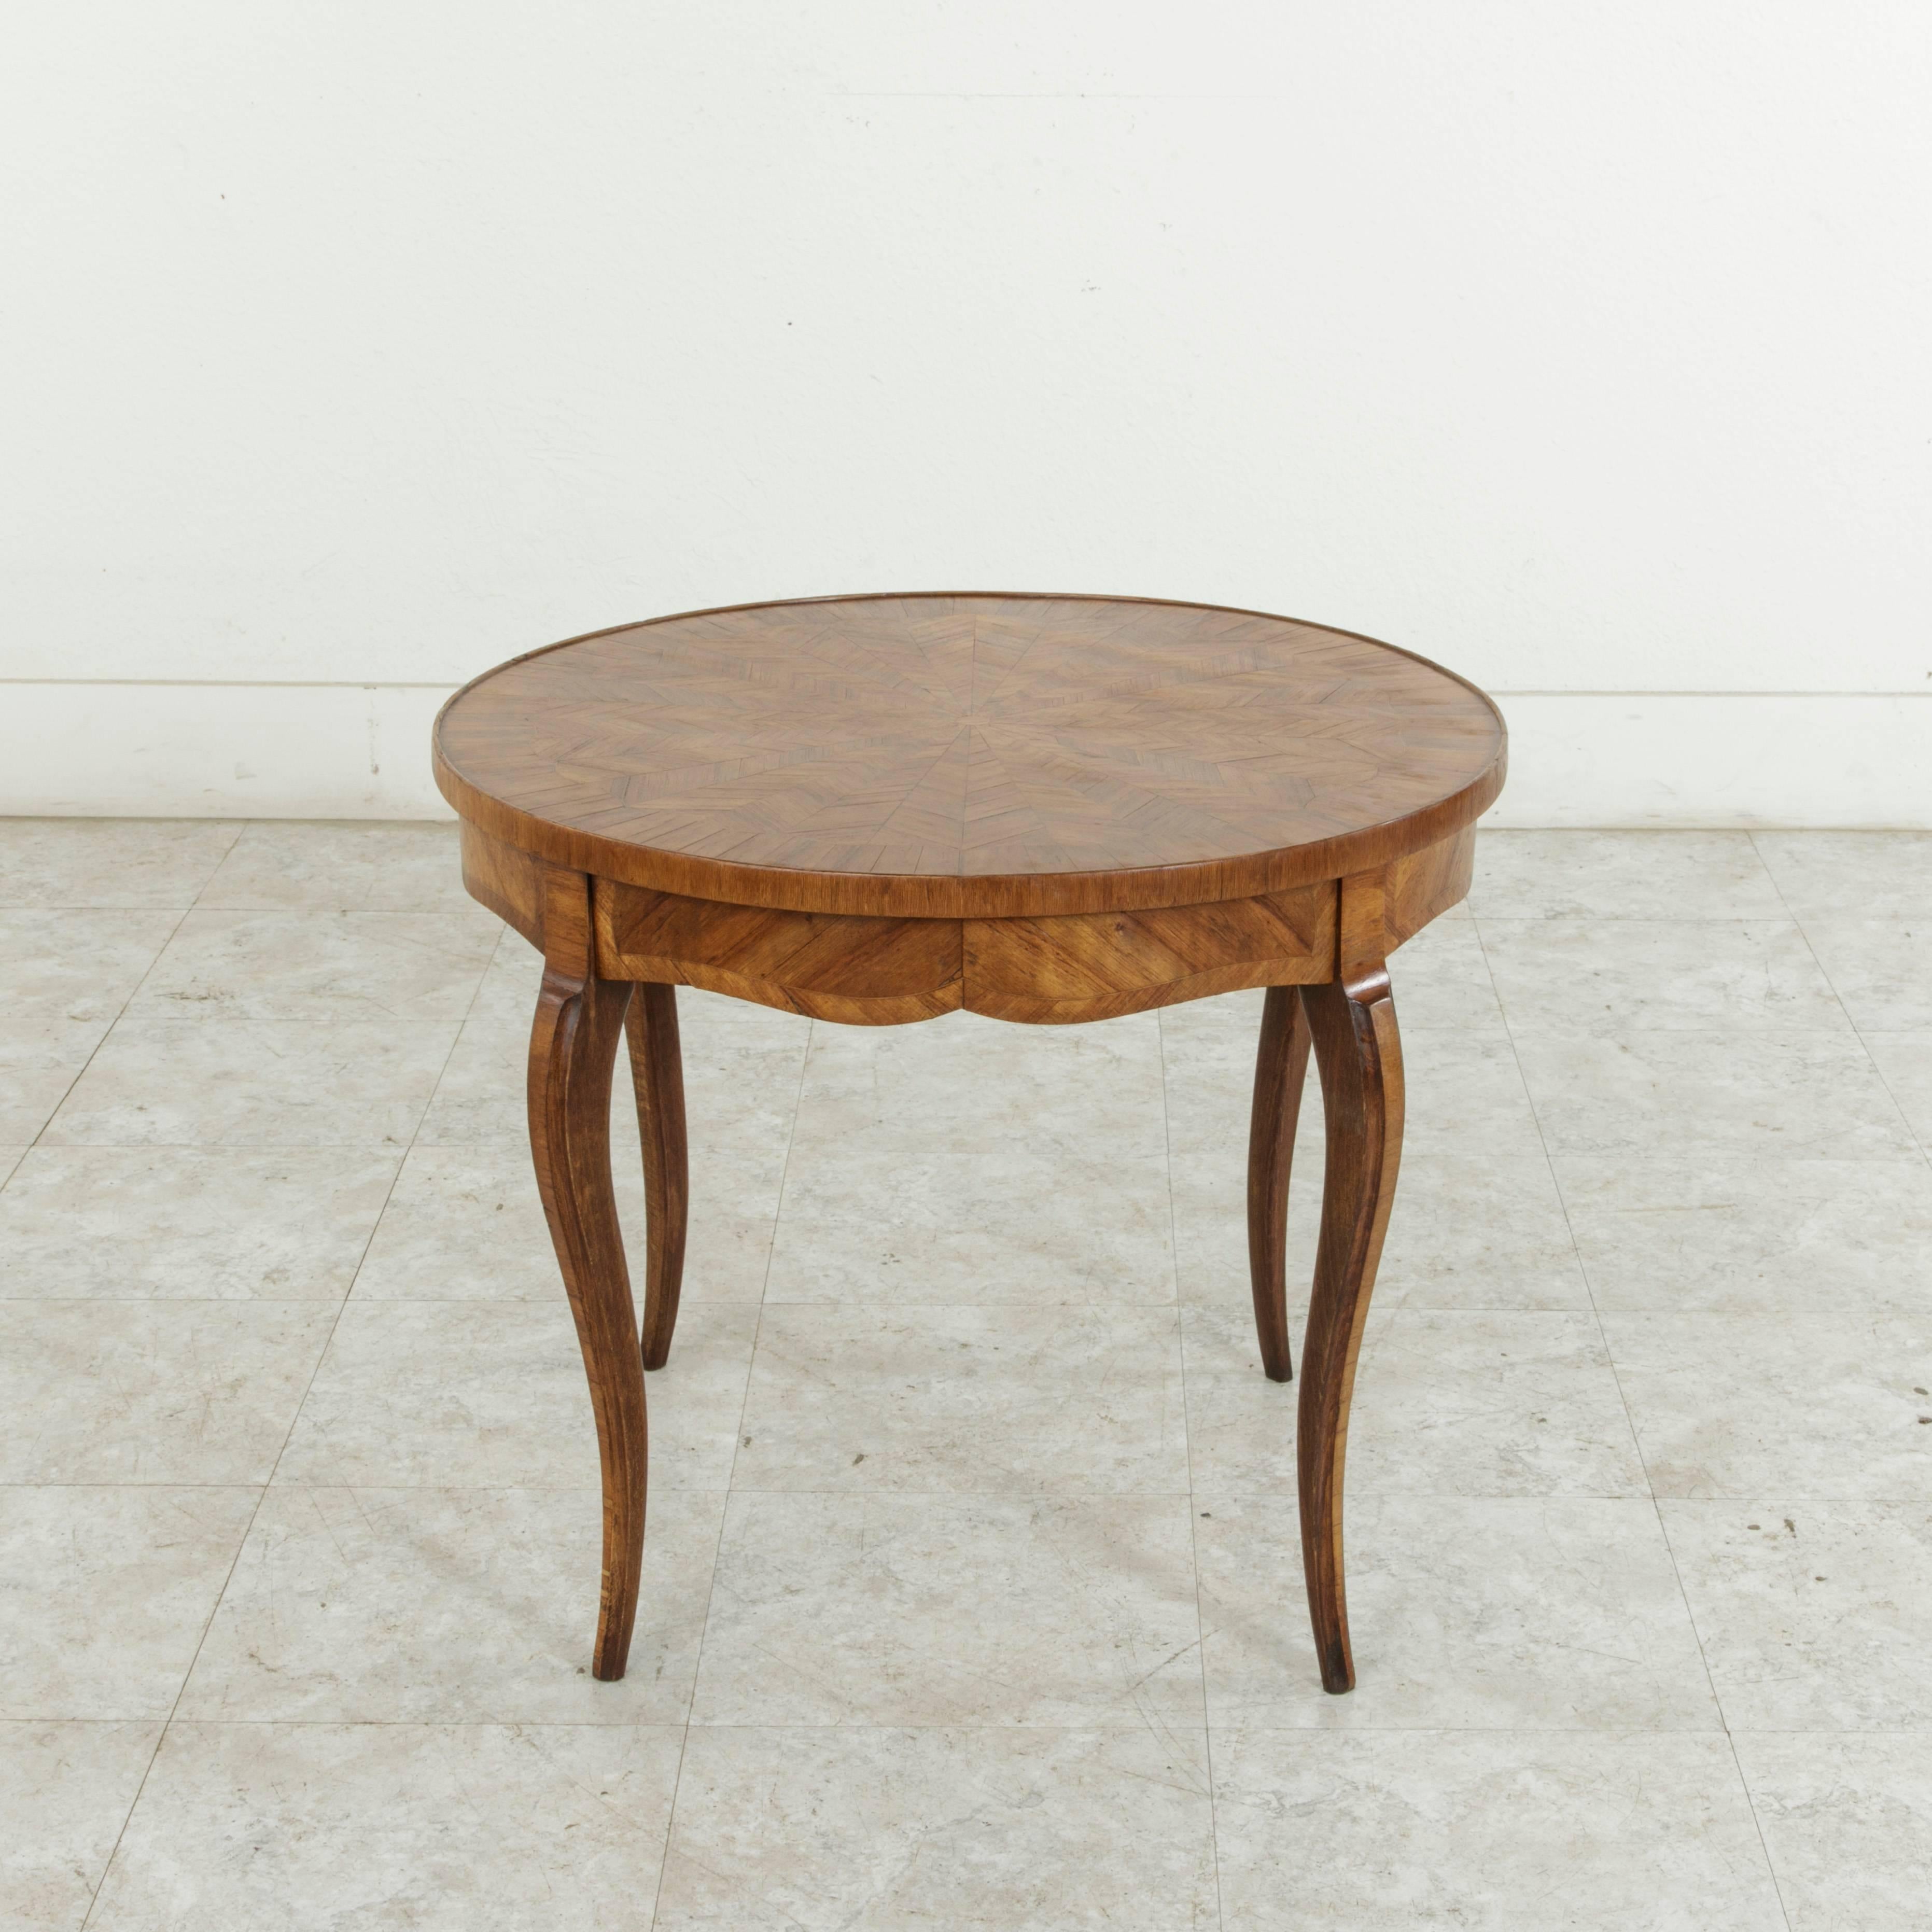 This early 20th century French walnut marquetry coffee table features a banded round top inlaid with a geometric sunburst pattern. Gently curved cabriole legs complete the look. Ideal as a coffee table or cocktail table for small scale living, circa